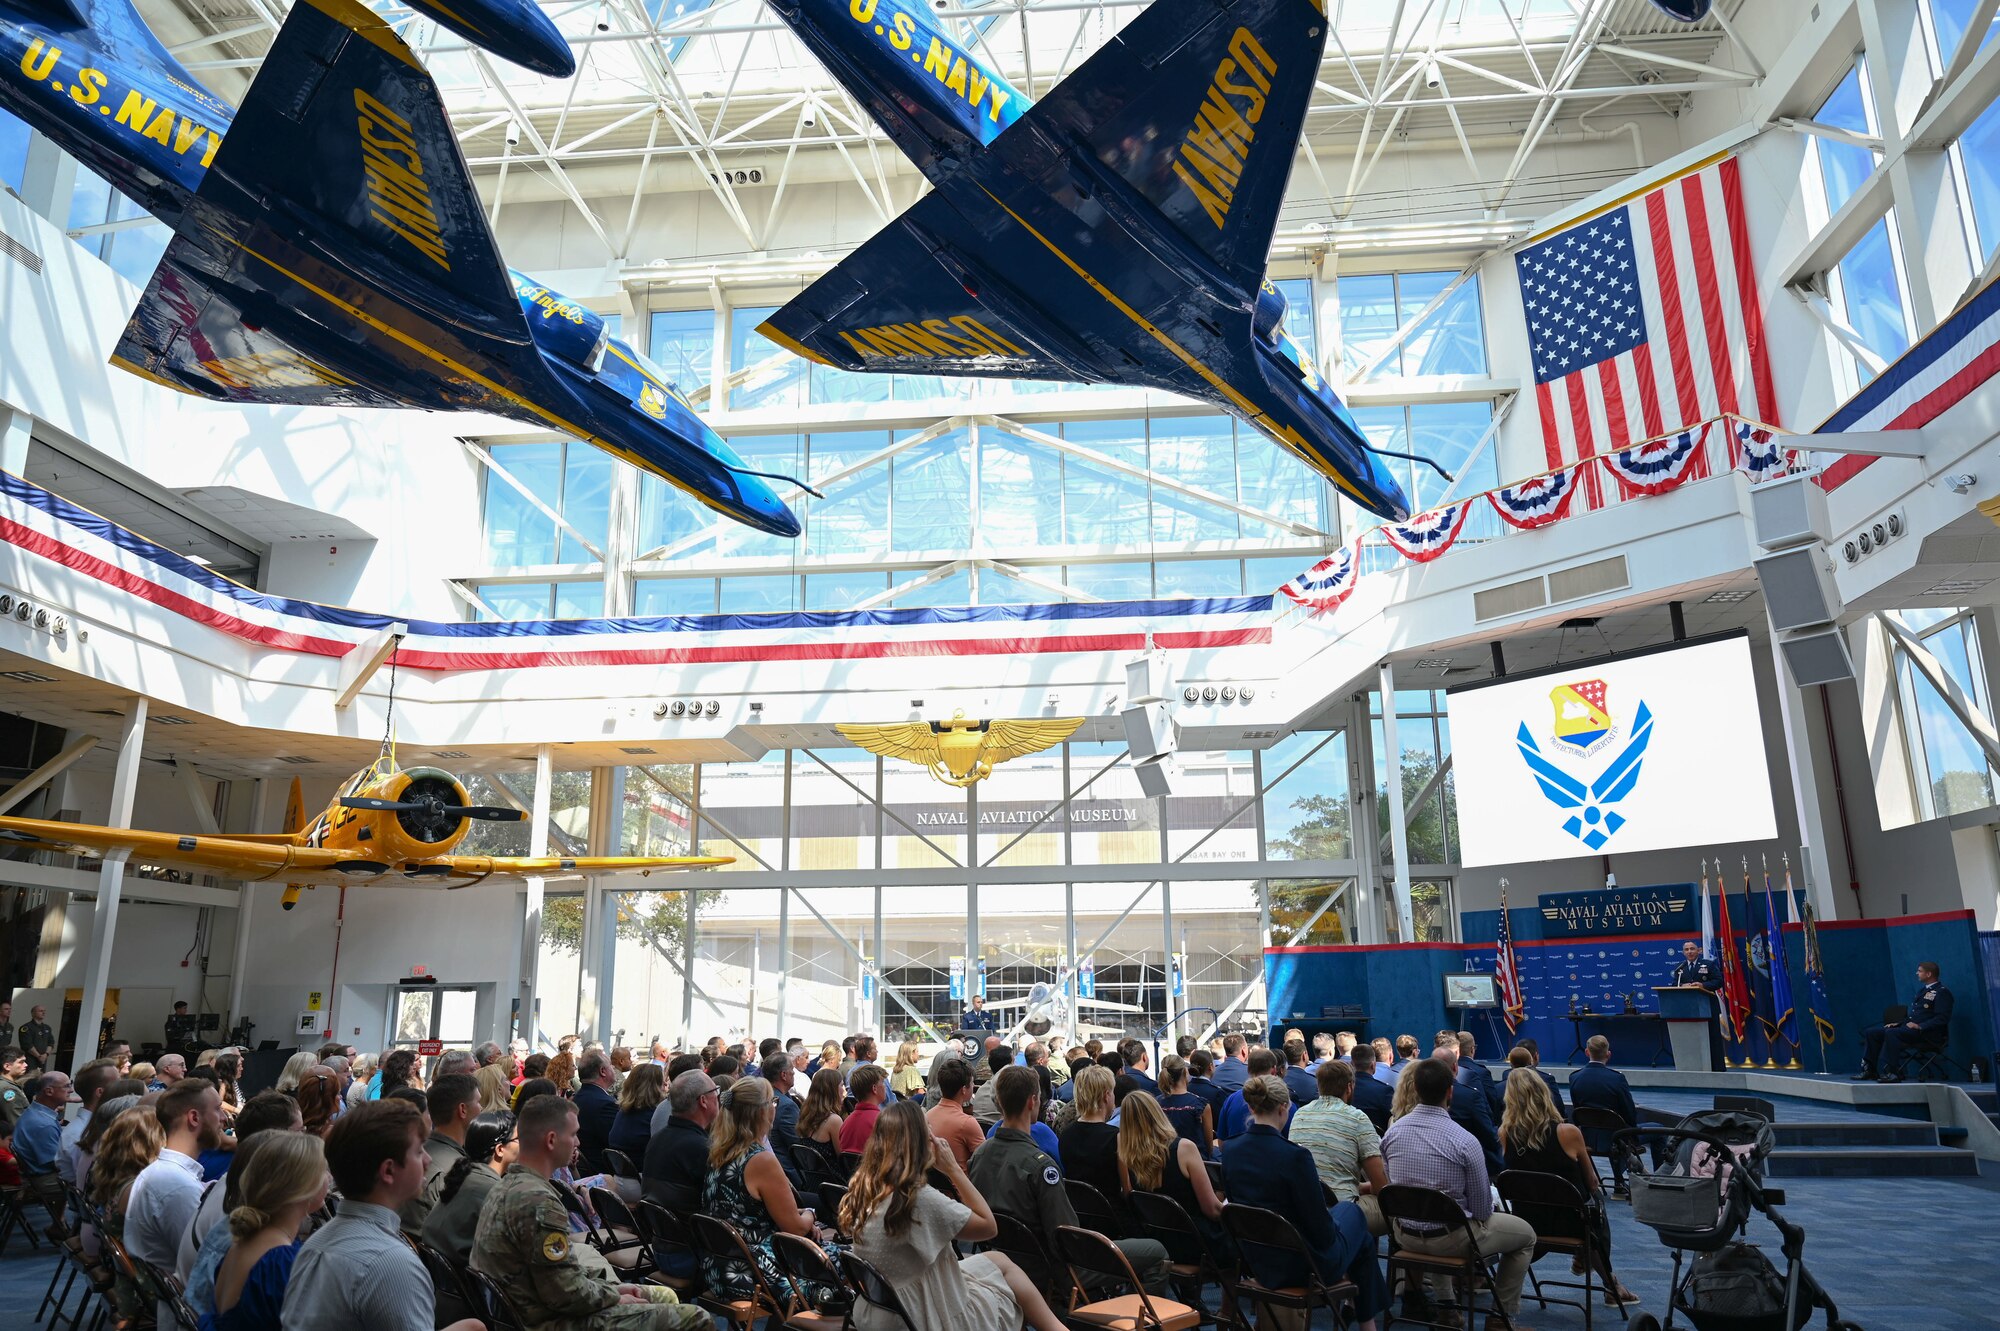 U.S. Air Force Col. Josh Koslov, 350th Spectrum Warfare Wing commander, gives the keynote address during the Undergraduate Combat Systems Officer Training graduation at the National Naval Aviation Museum, Naval Air Station Pensacola, Fla., Aug. 25, 2023. Koslov was invited as the keynote speaker during the graduation ceremony. (U.S. Air Force photo by Capt. Benjamin Aronson)